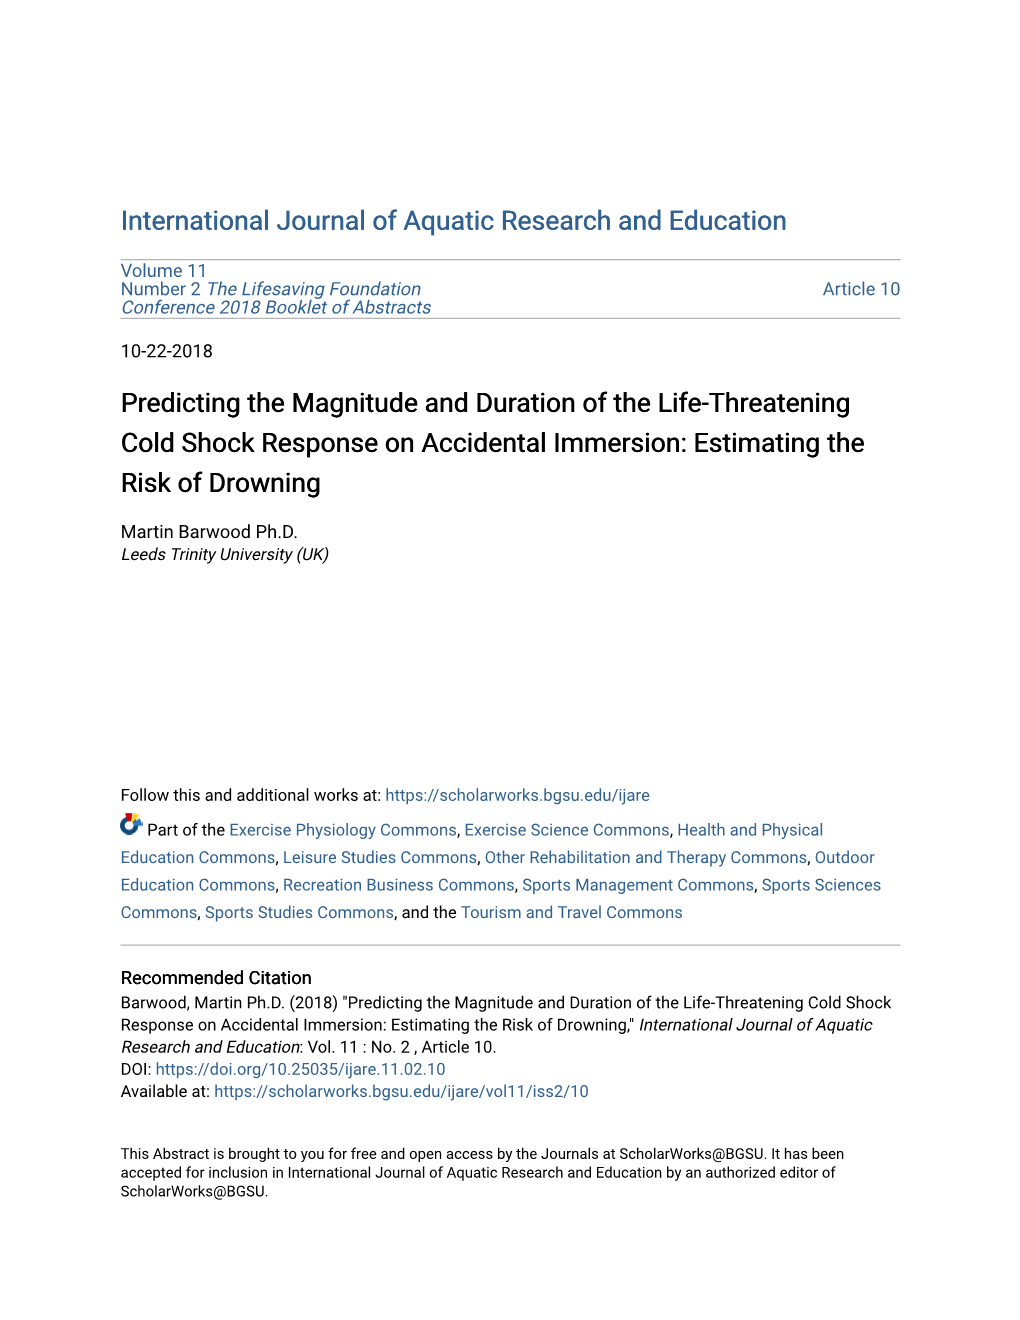 Predicting the Magnitude and Duration of the Life-Threatening Cold Shock Response on Accidental Immersion: Estimating the Risk of Drowning